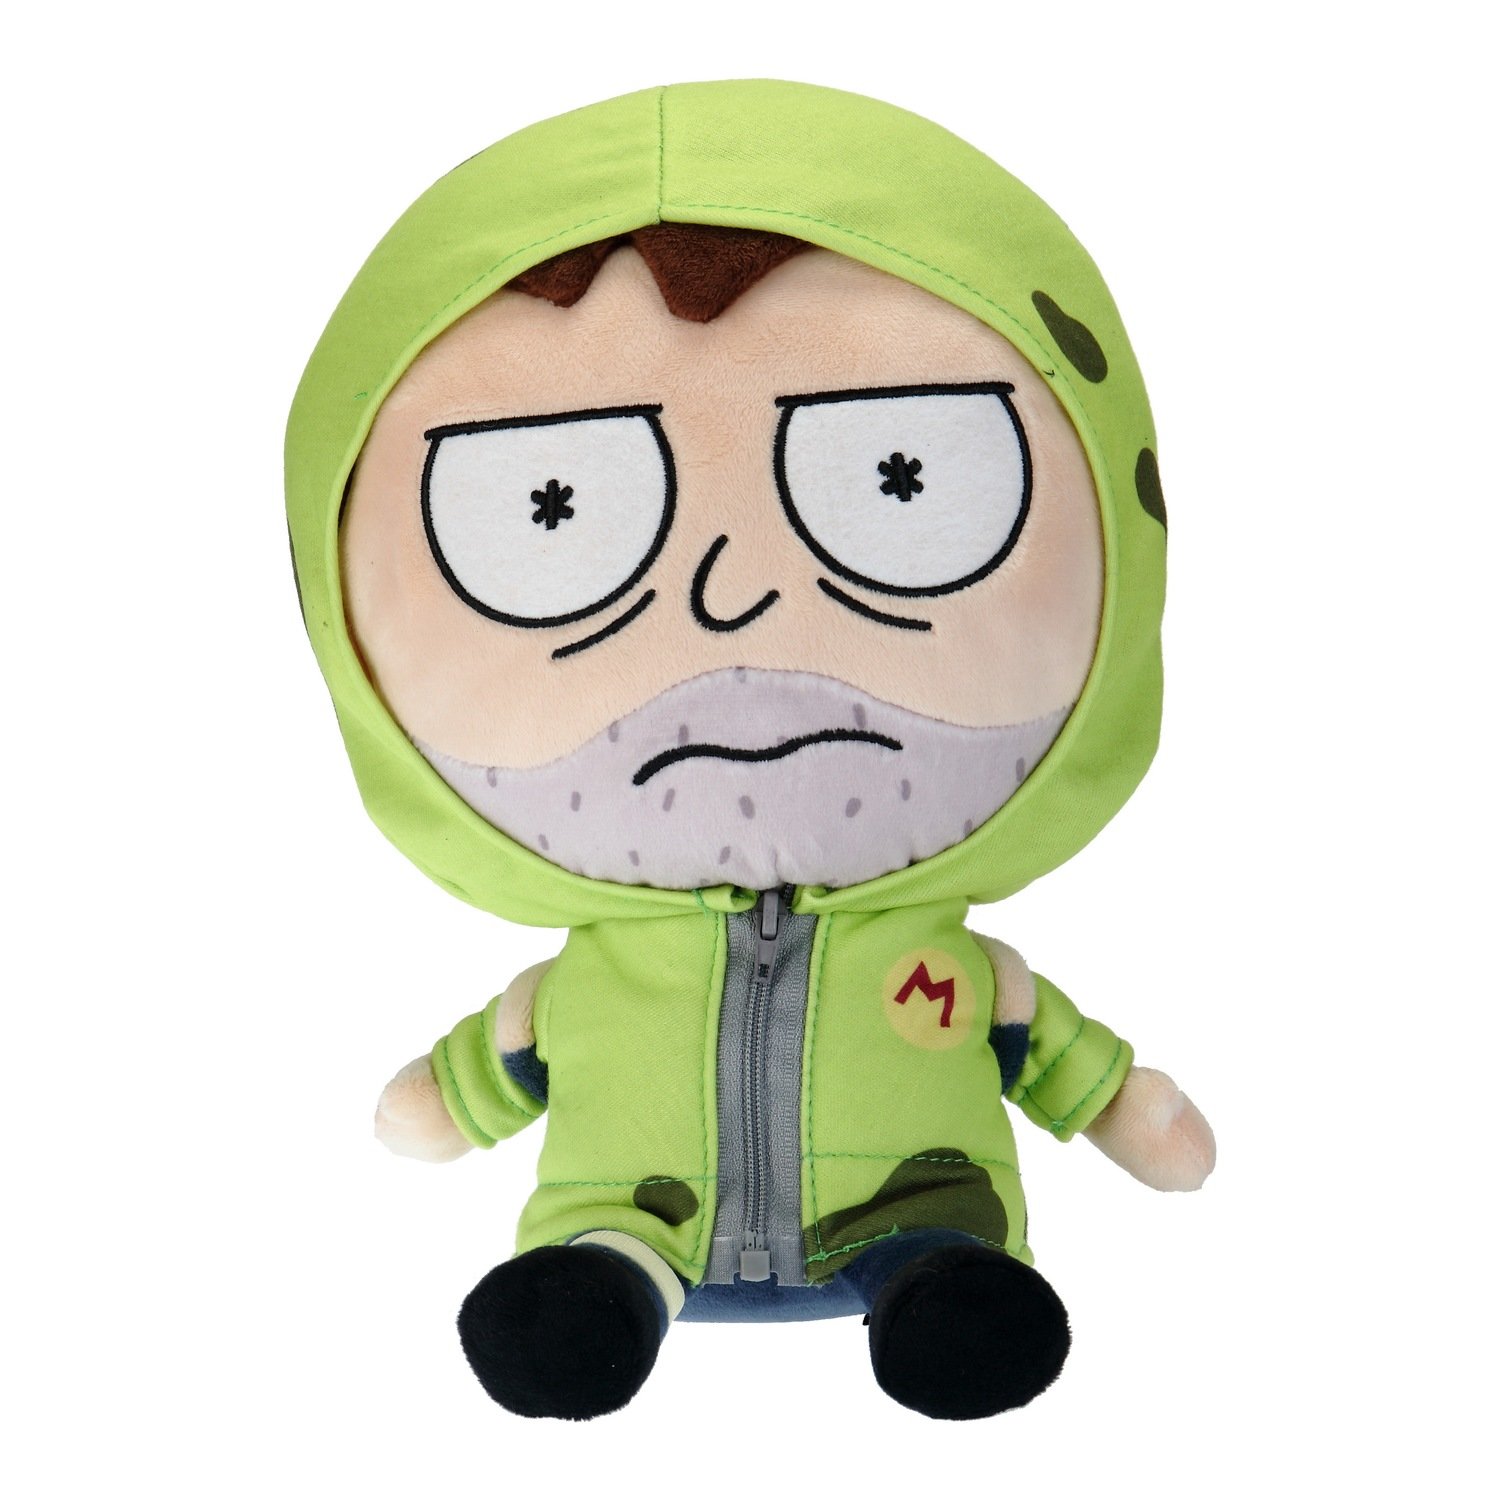 Rick and Morty: Survivalist Morty Plush